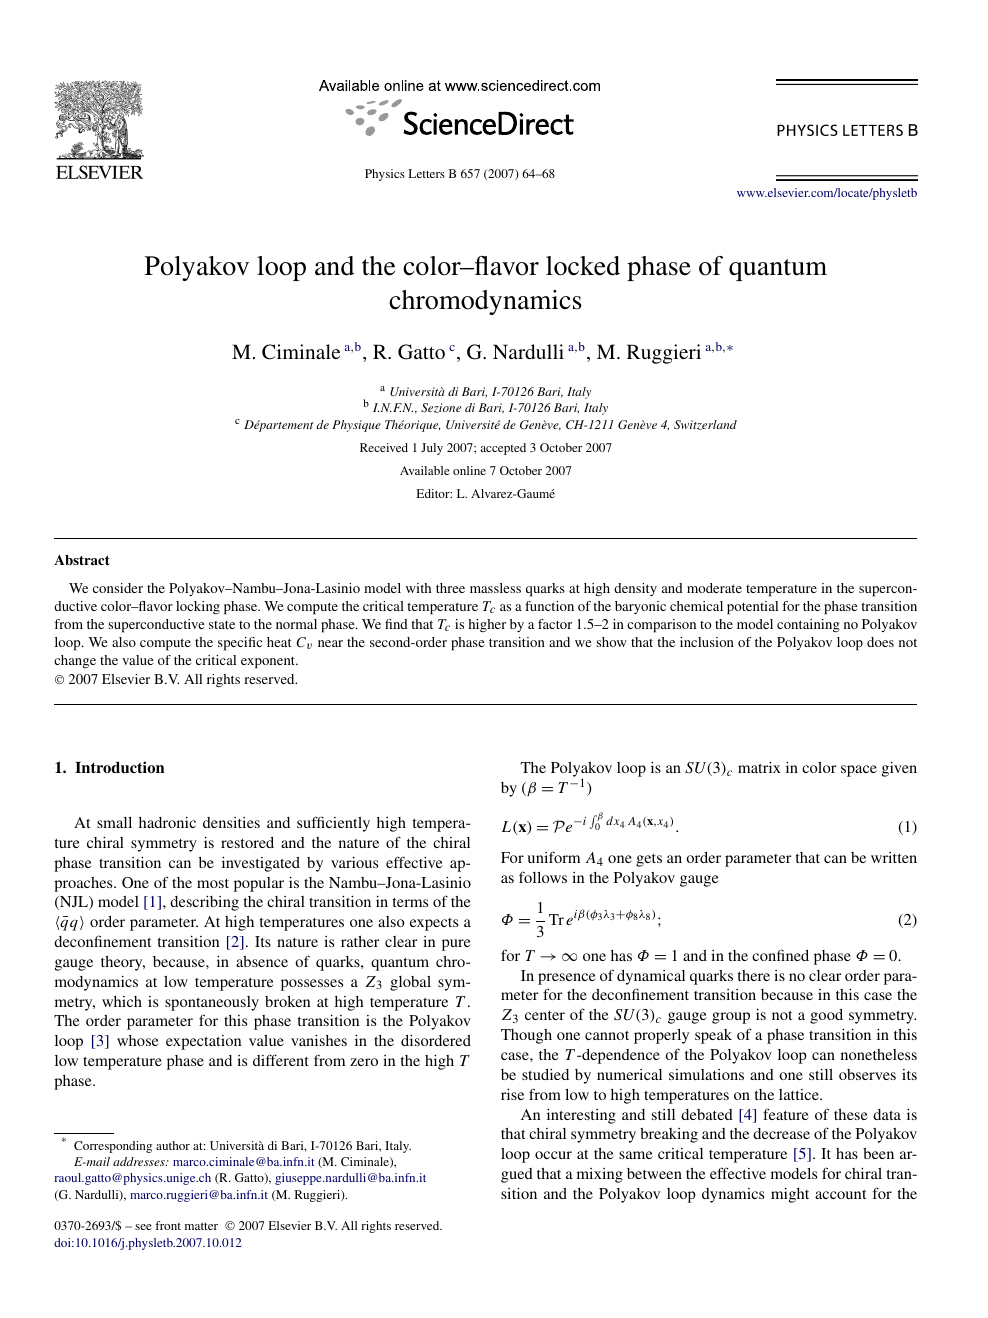 Polyakov Loop And The Color Flavor Locked Phase Of Quantum Chromodynamics Topic Of Research Paper In Physical Sciences Download Scholarly Article Pdf And Read For Free On Cyberleninka Open Science Hub